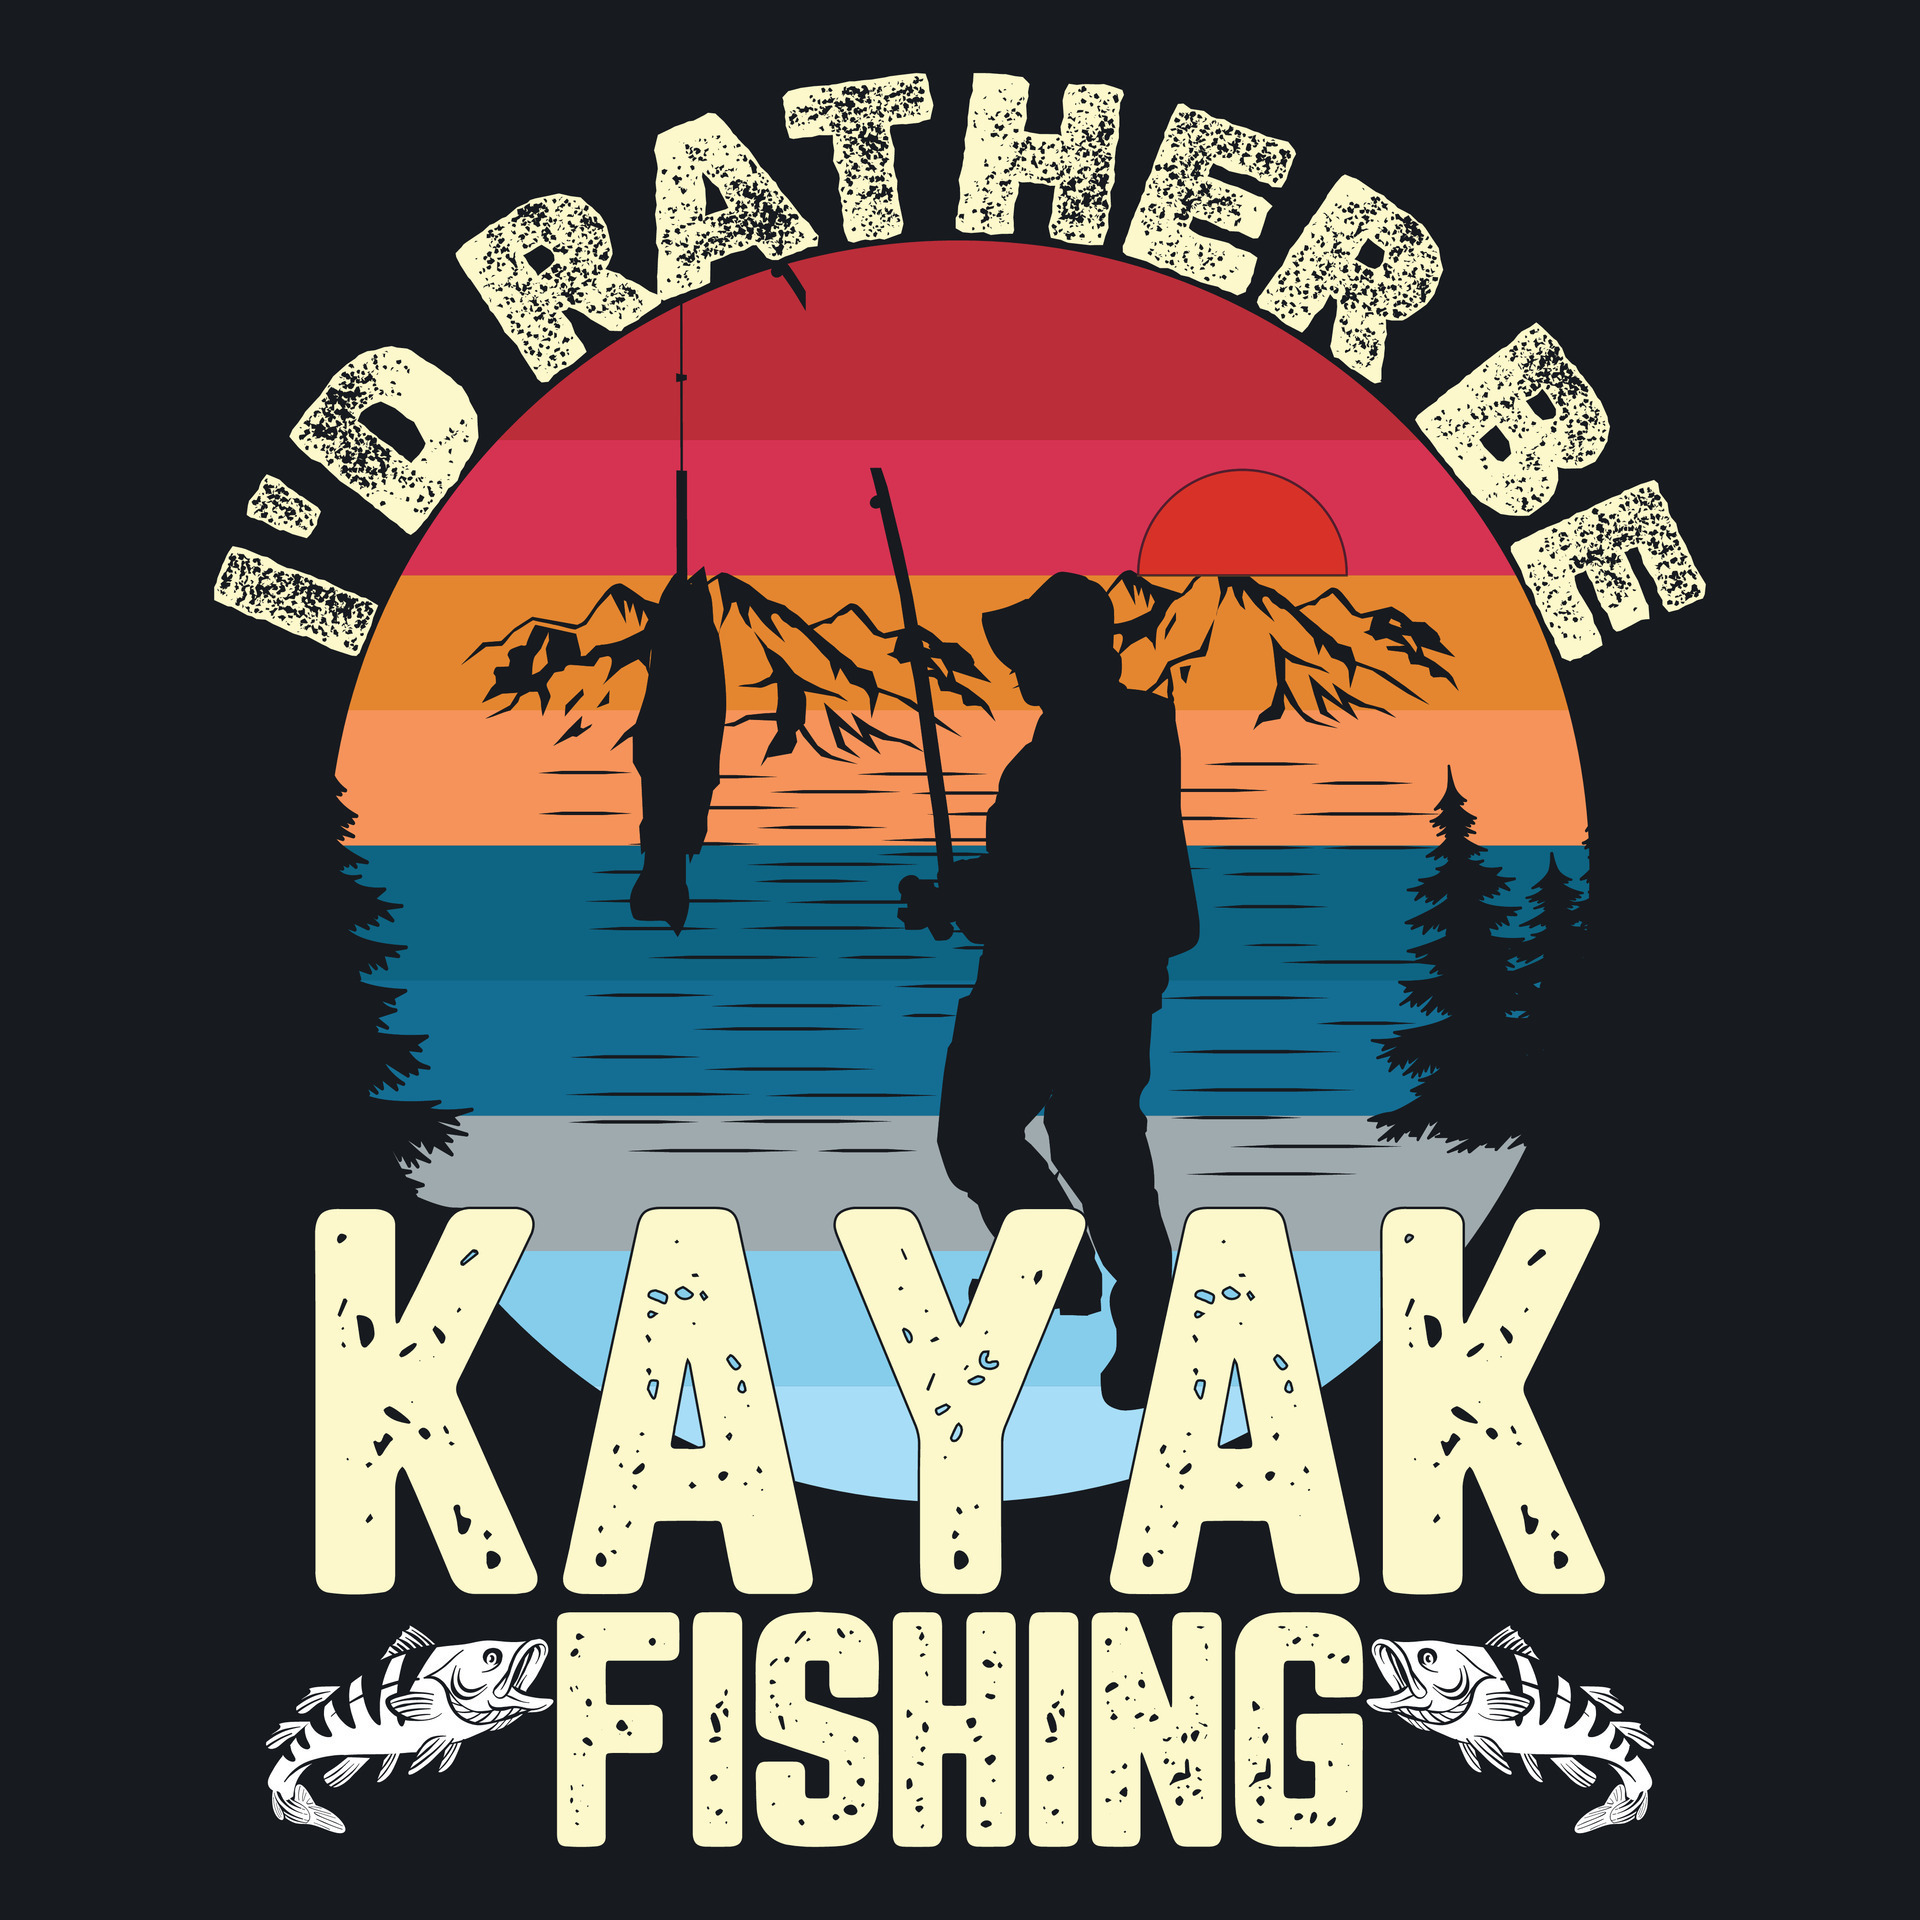 I'd Rather Be Kayak Fishing Funny Bass Trendy Gift Set Idea T